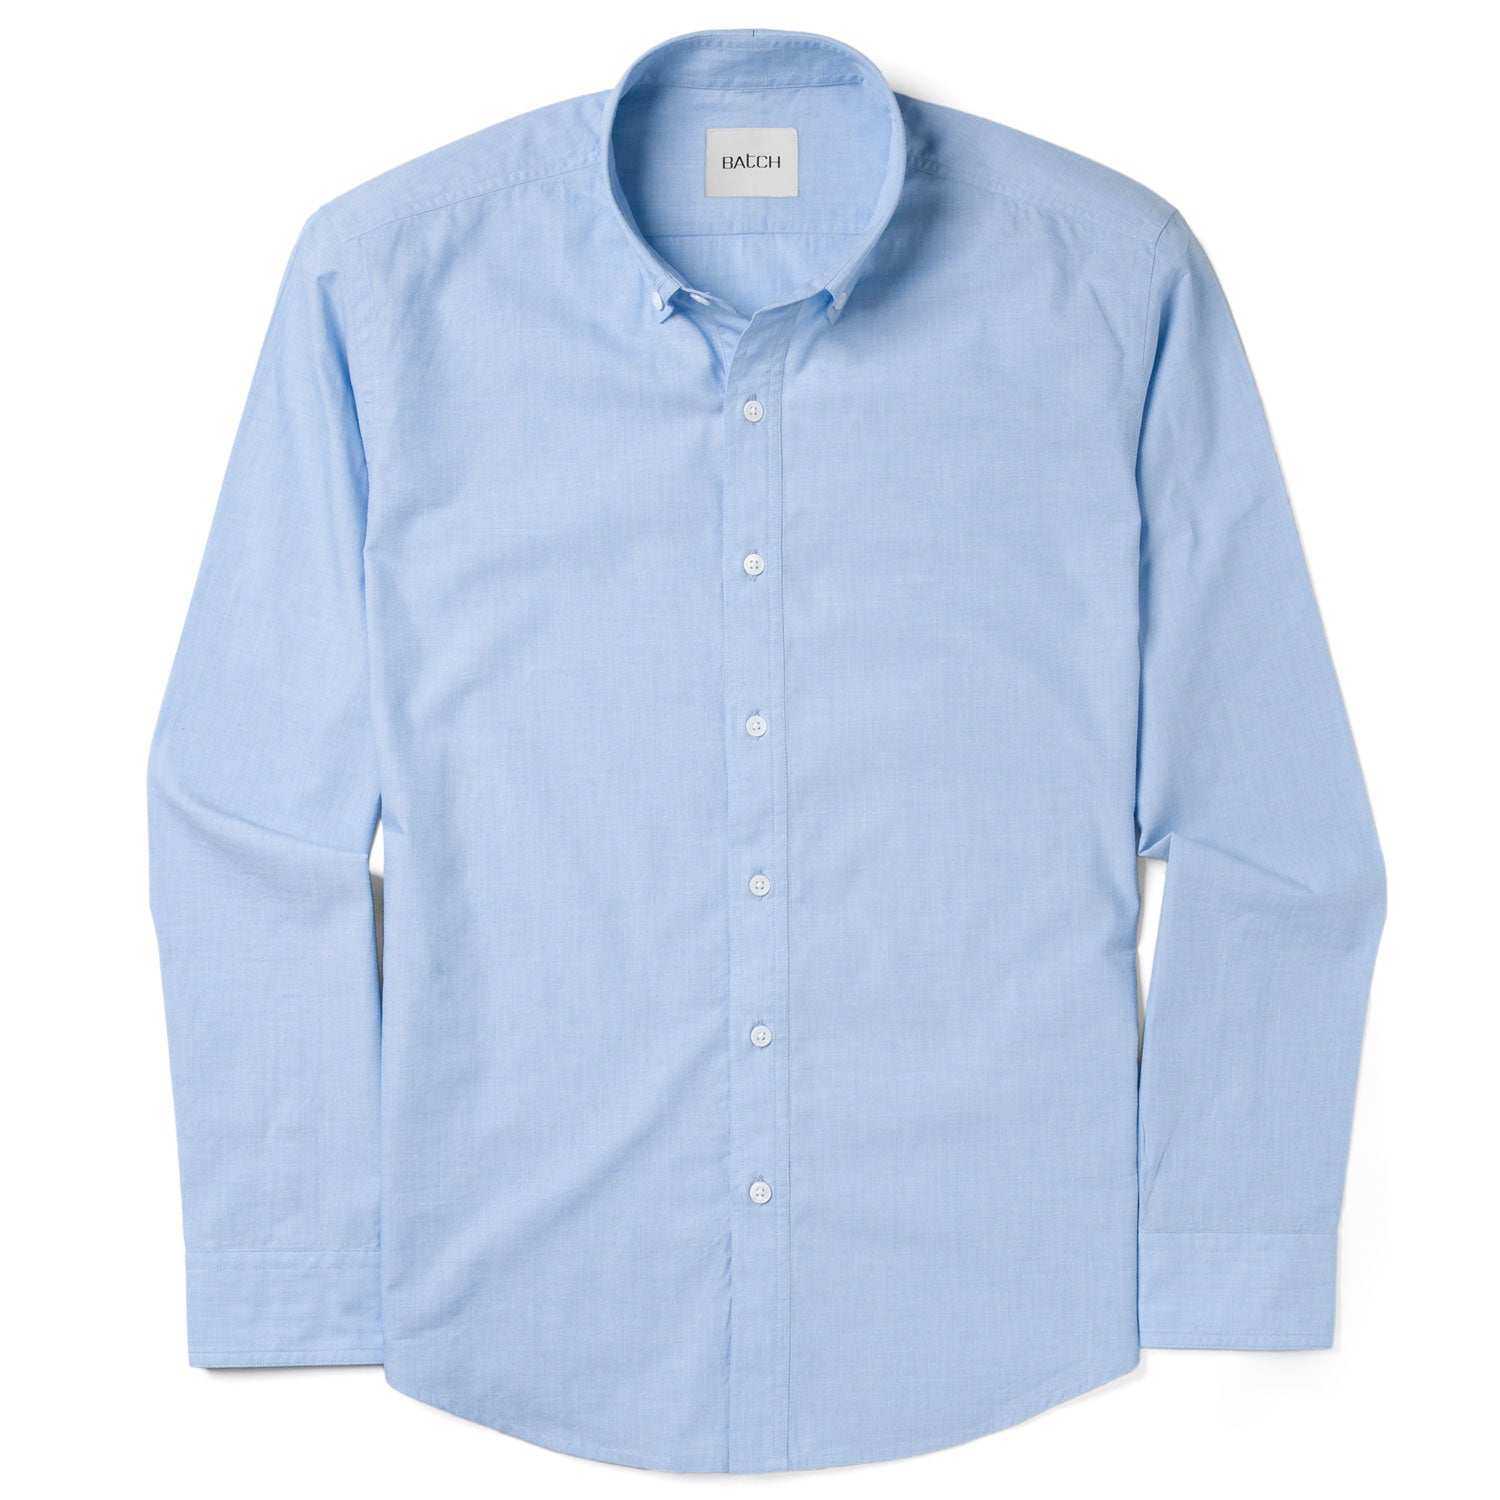 Essential Casual Shirt - Clean Blue Cotton End-on-end